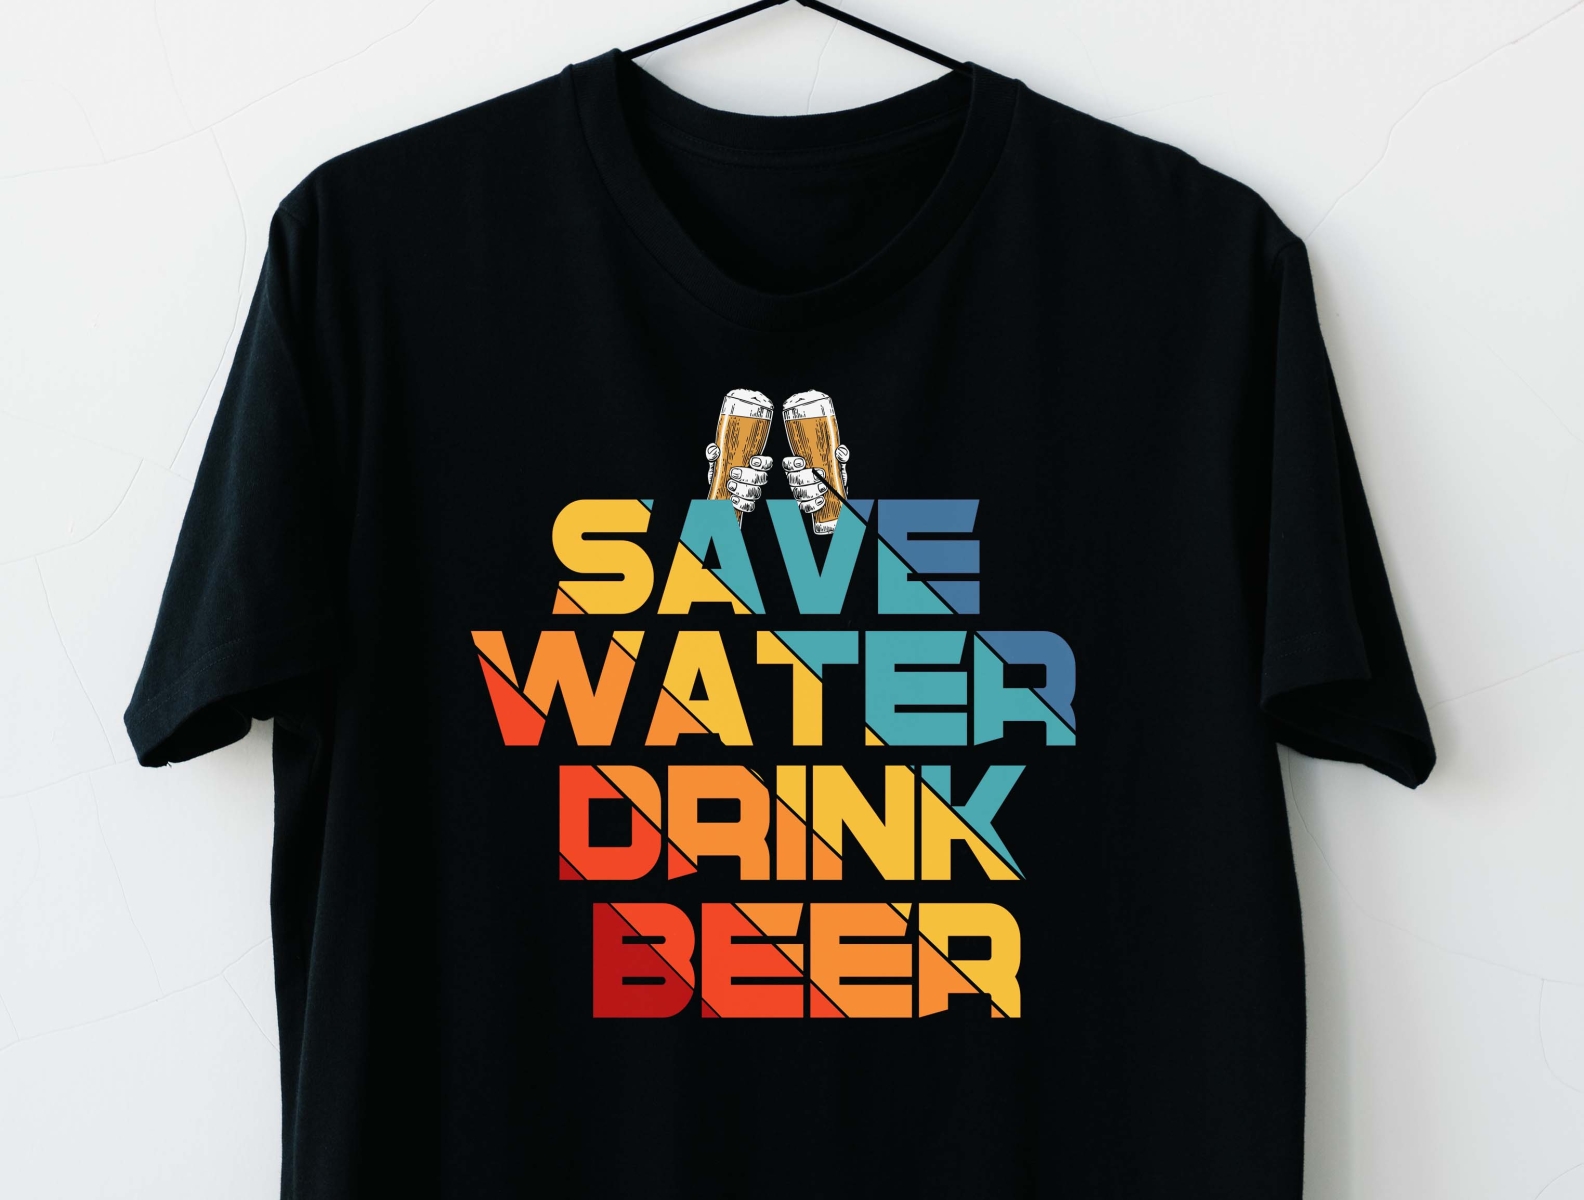 SAVE WATER DRINK BEER by Saydy Raza Tamim on Dribbble